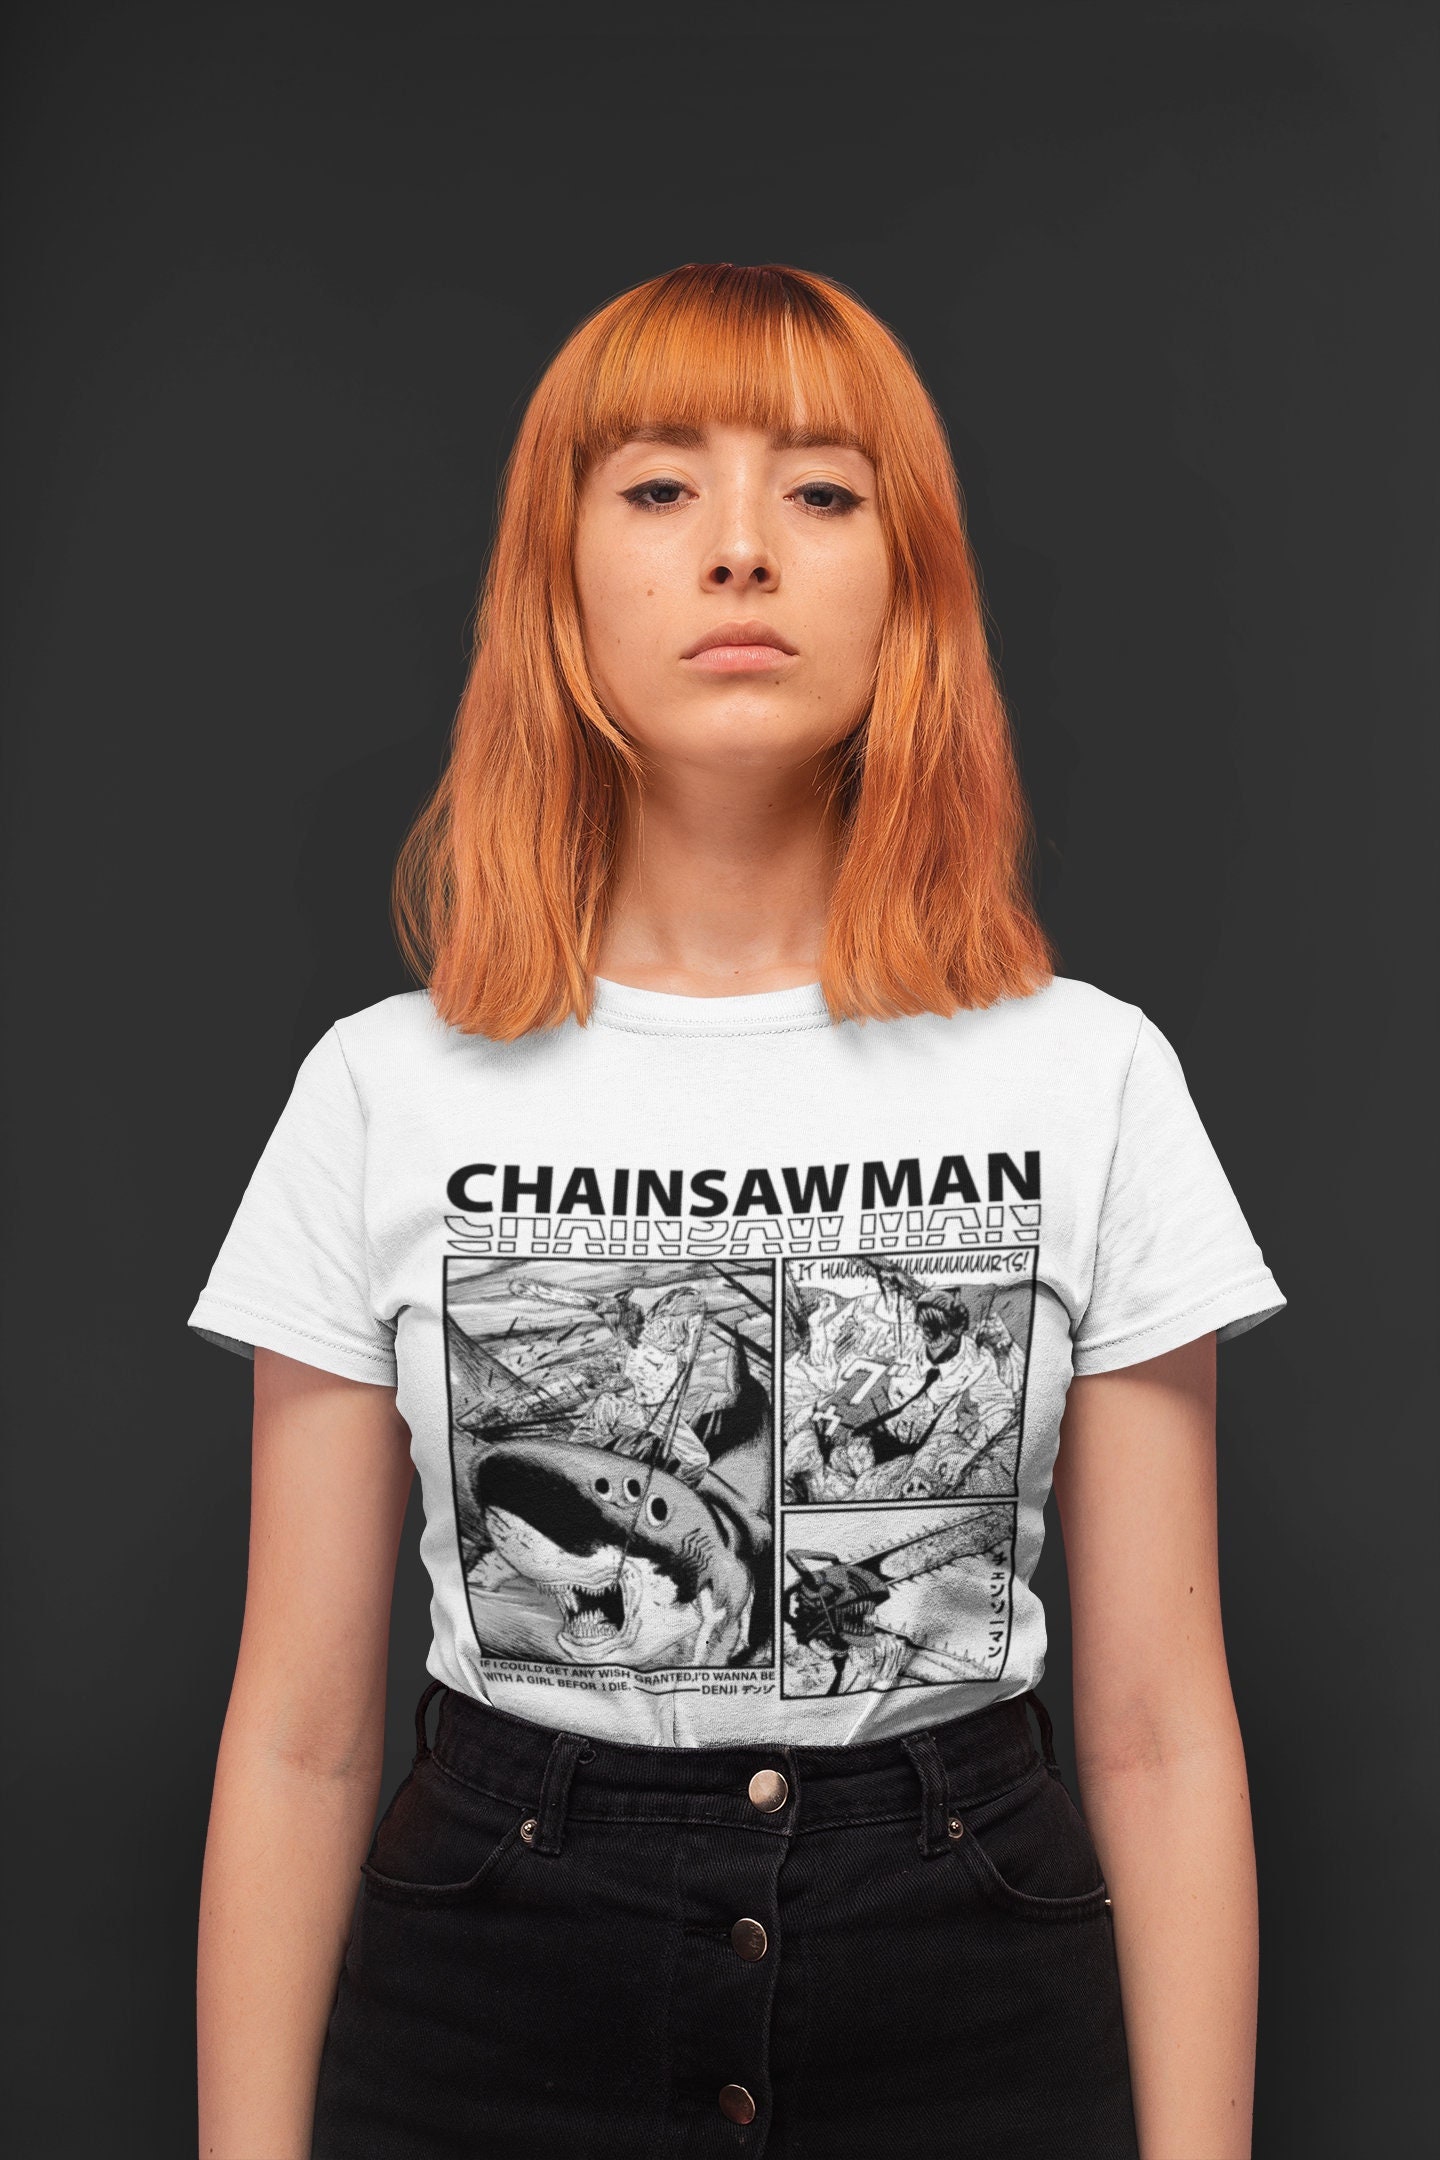 Discover Chainsaw Power Shirt